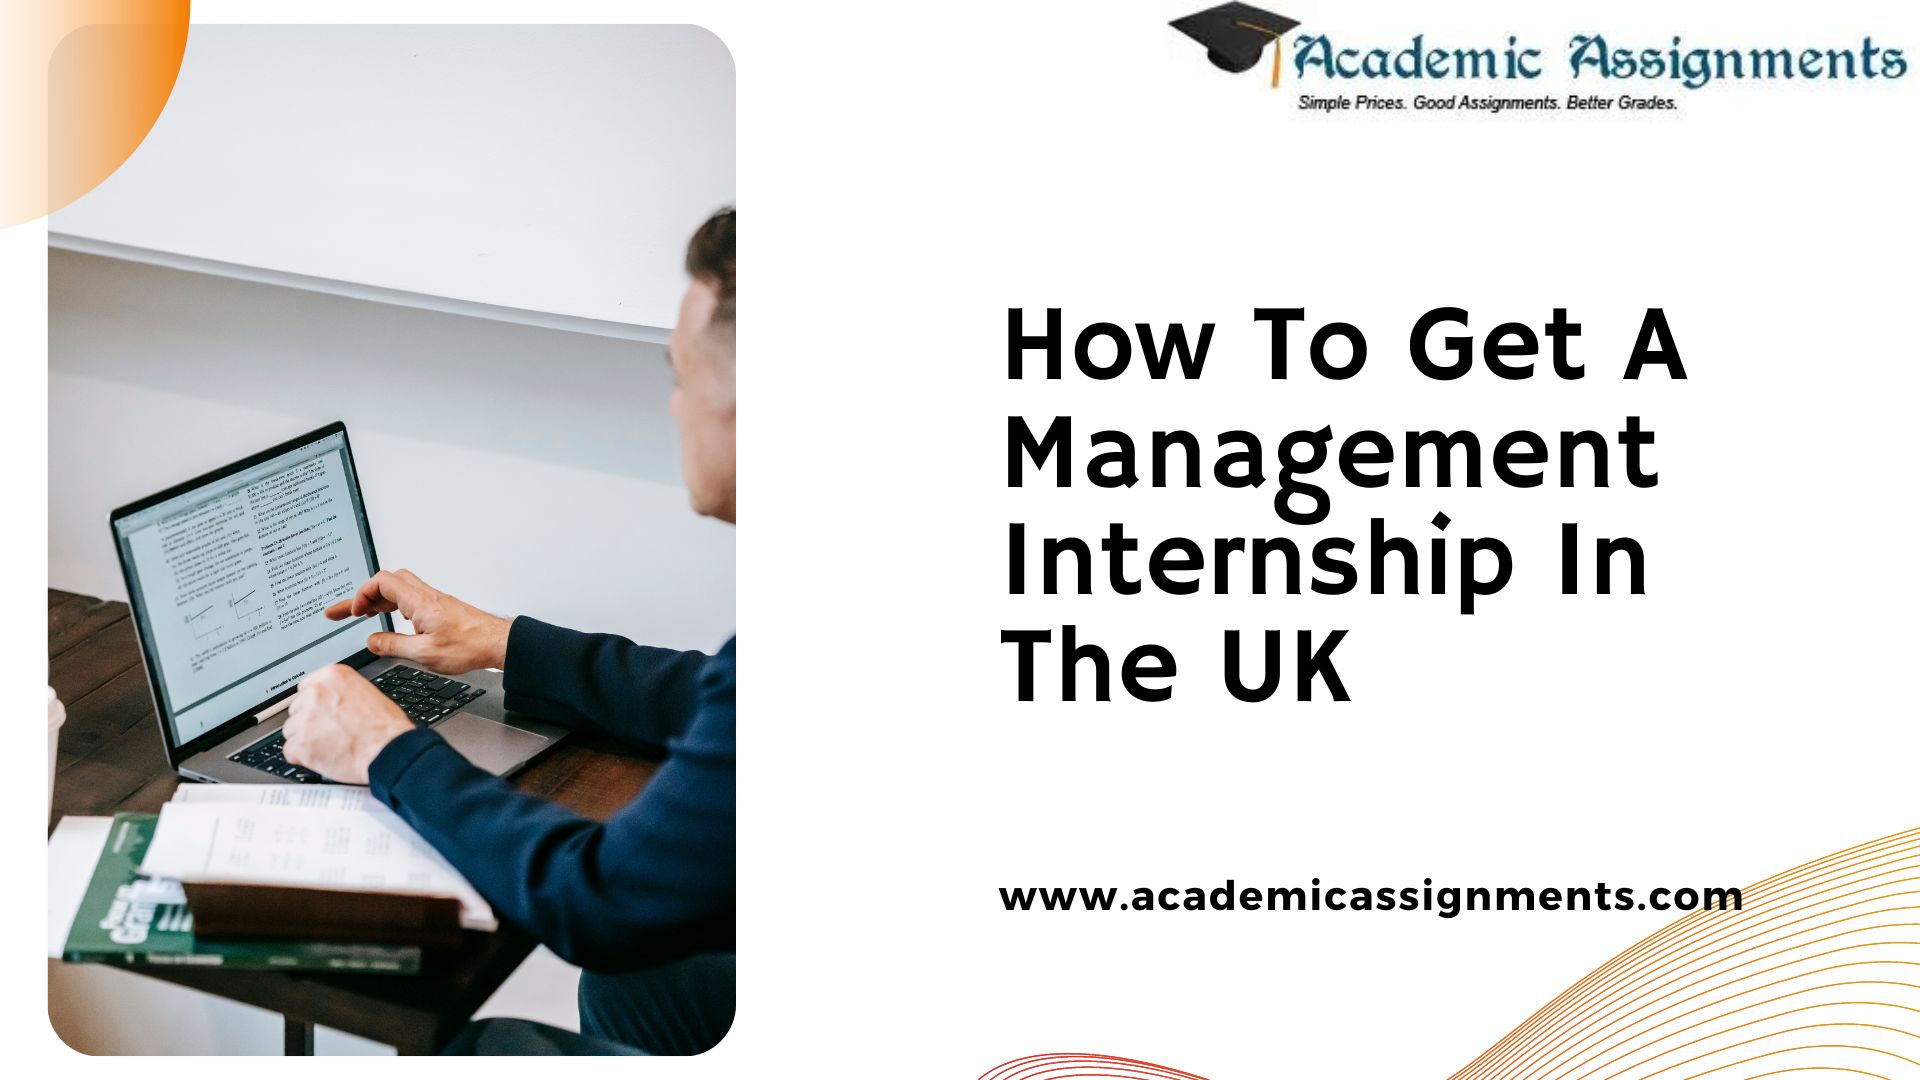 How To Get A Management Internship In The UK